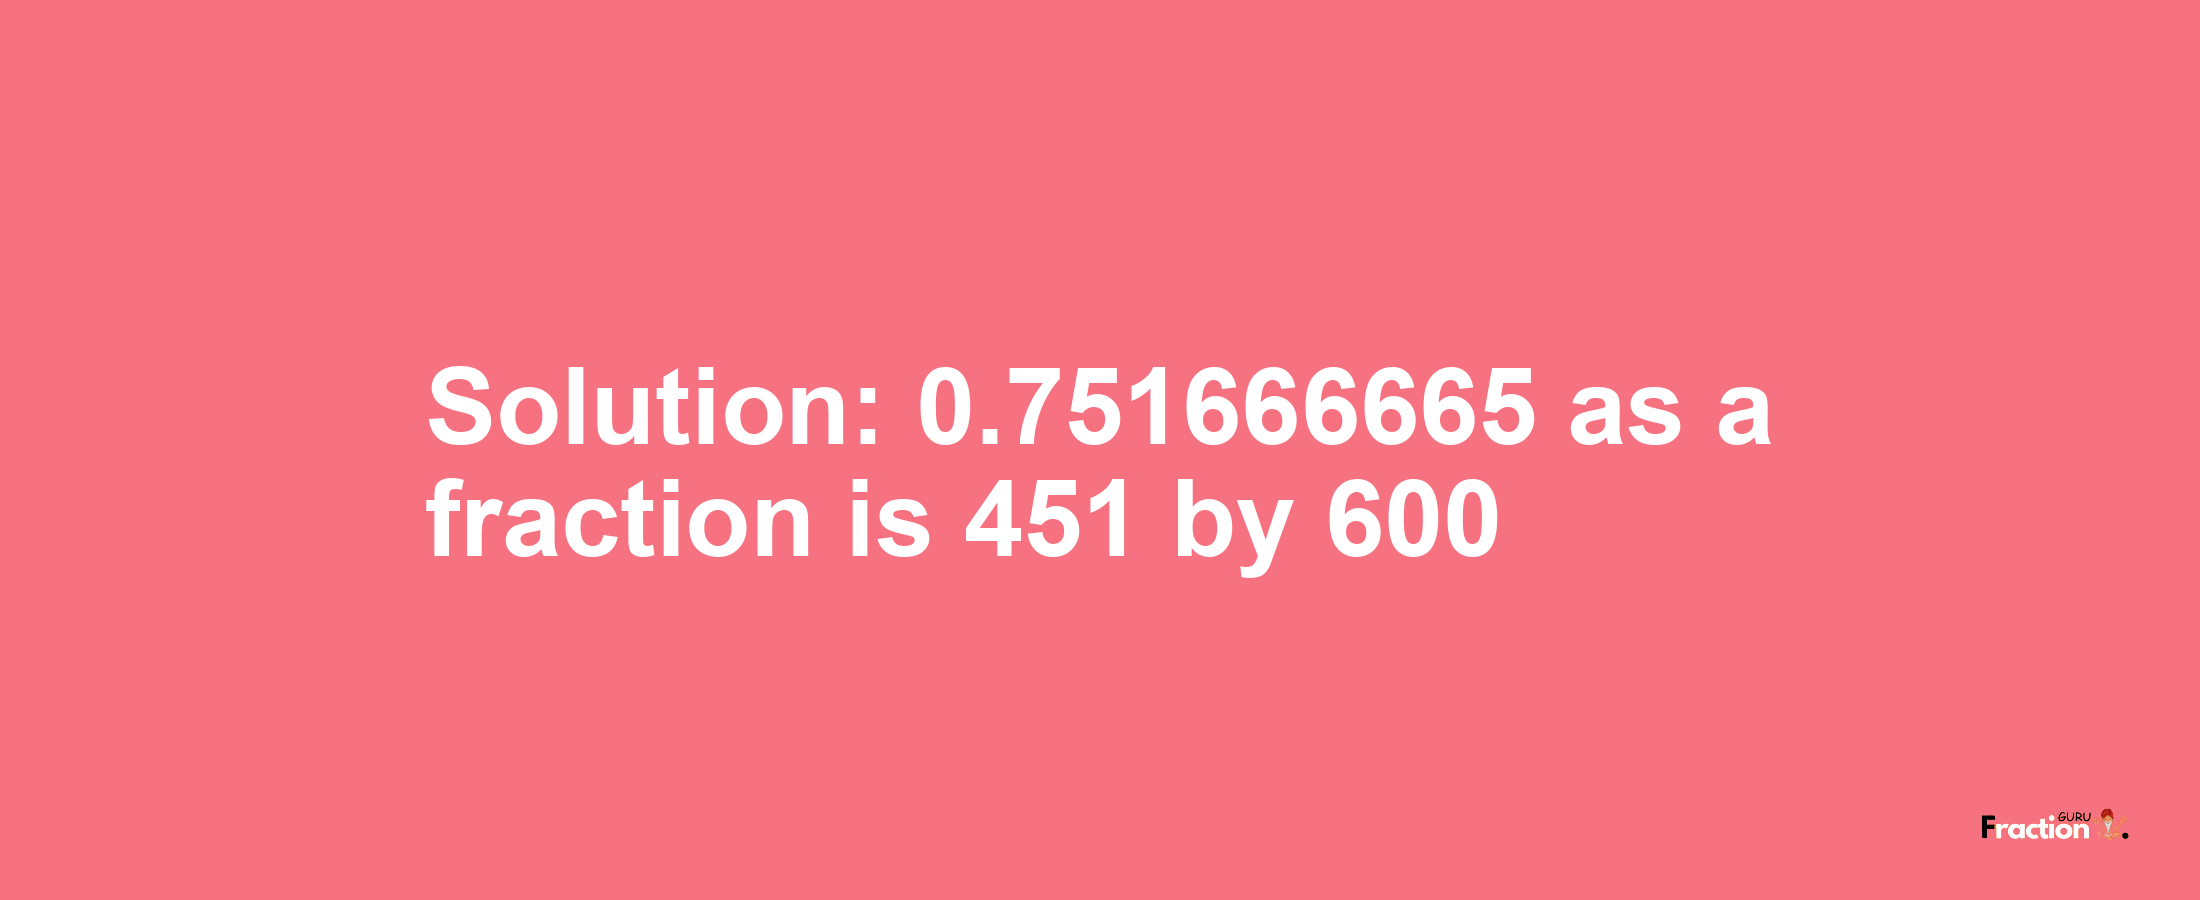 Solution:0.751666665 as a fraction is 451/600